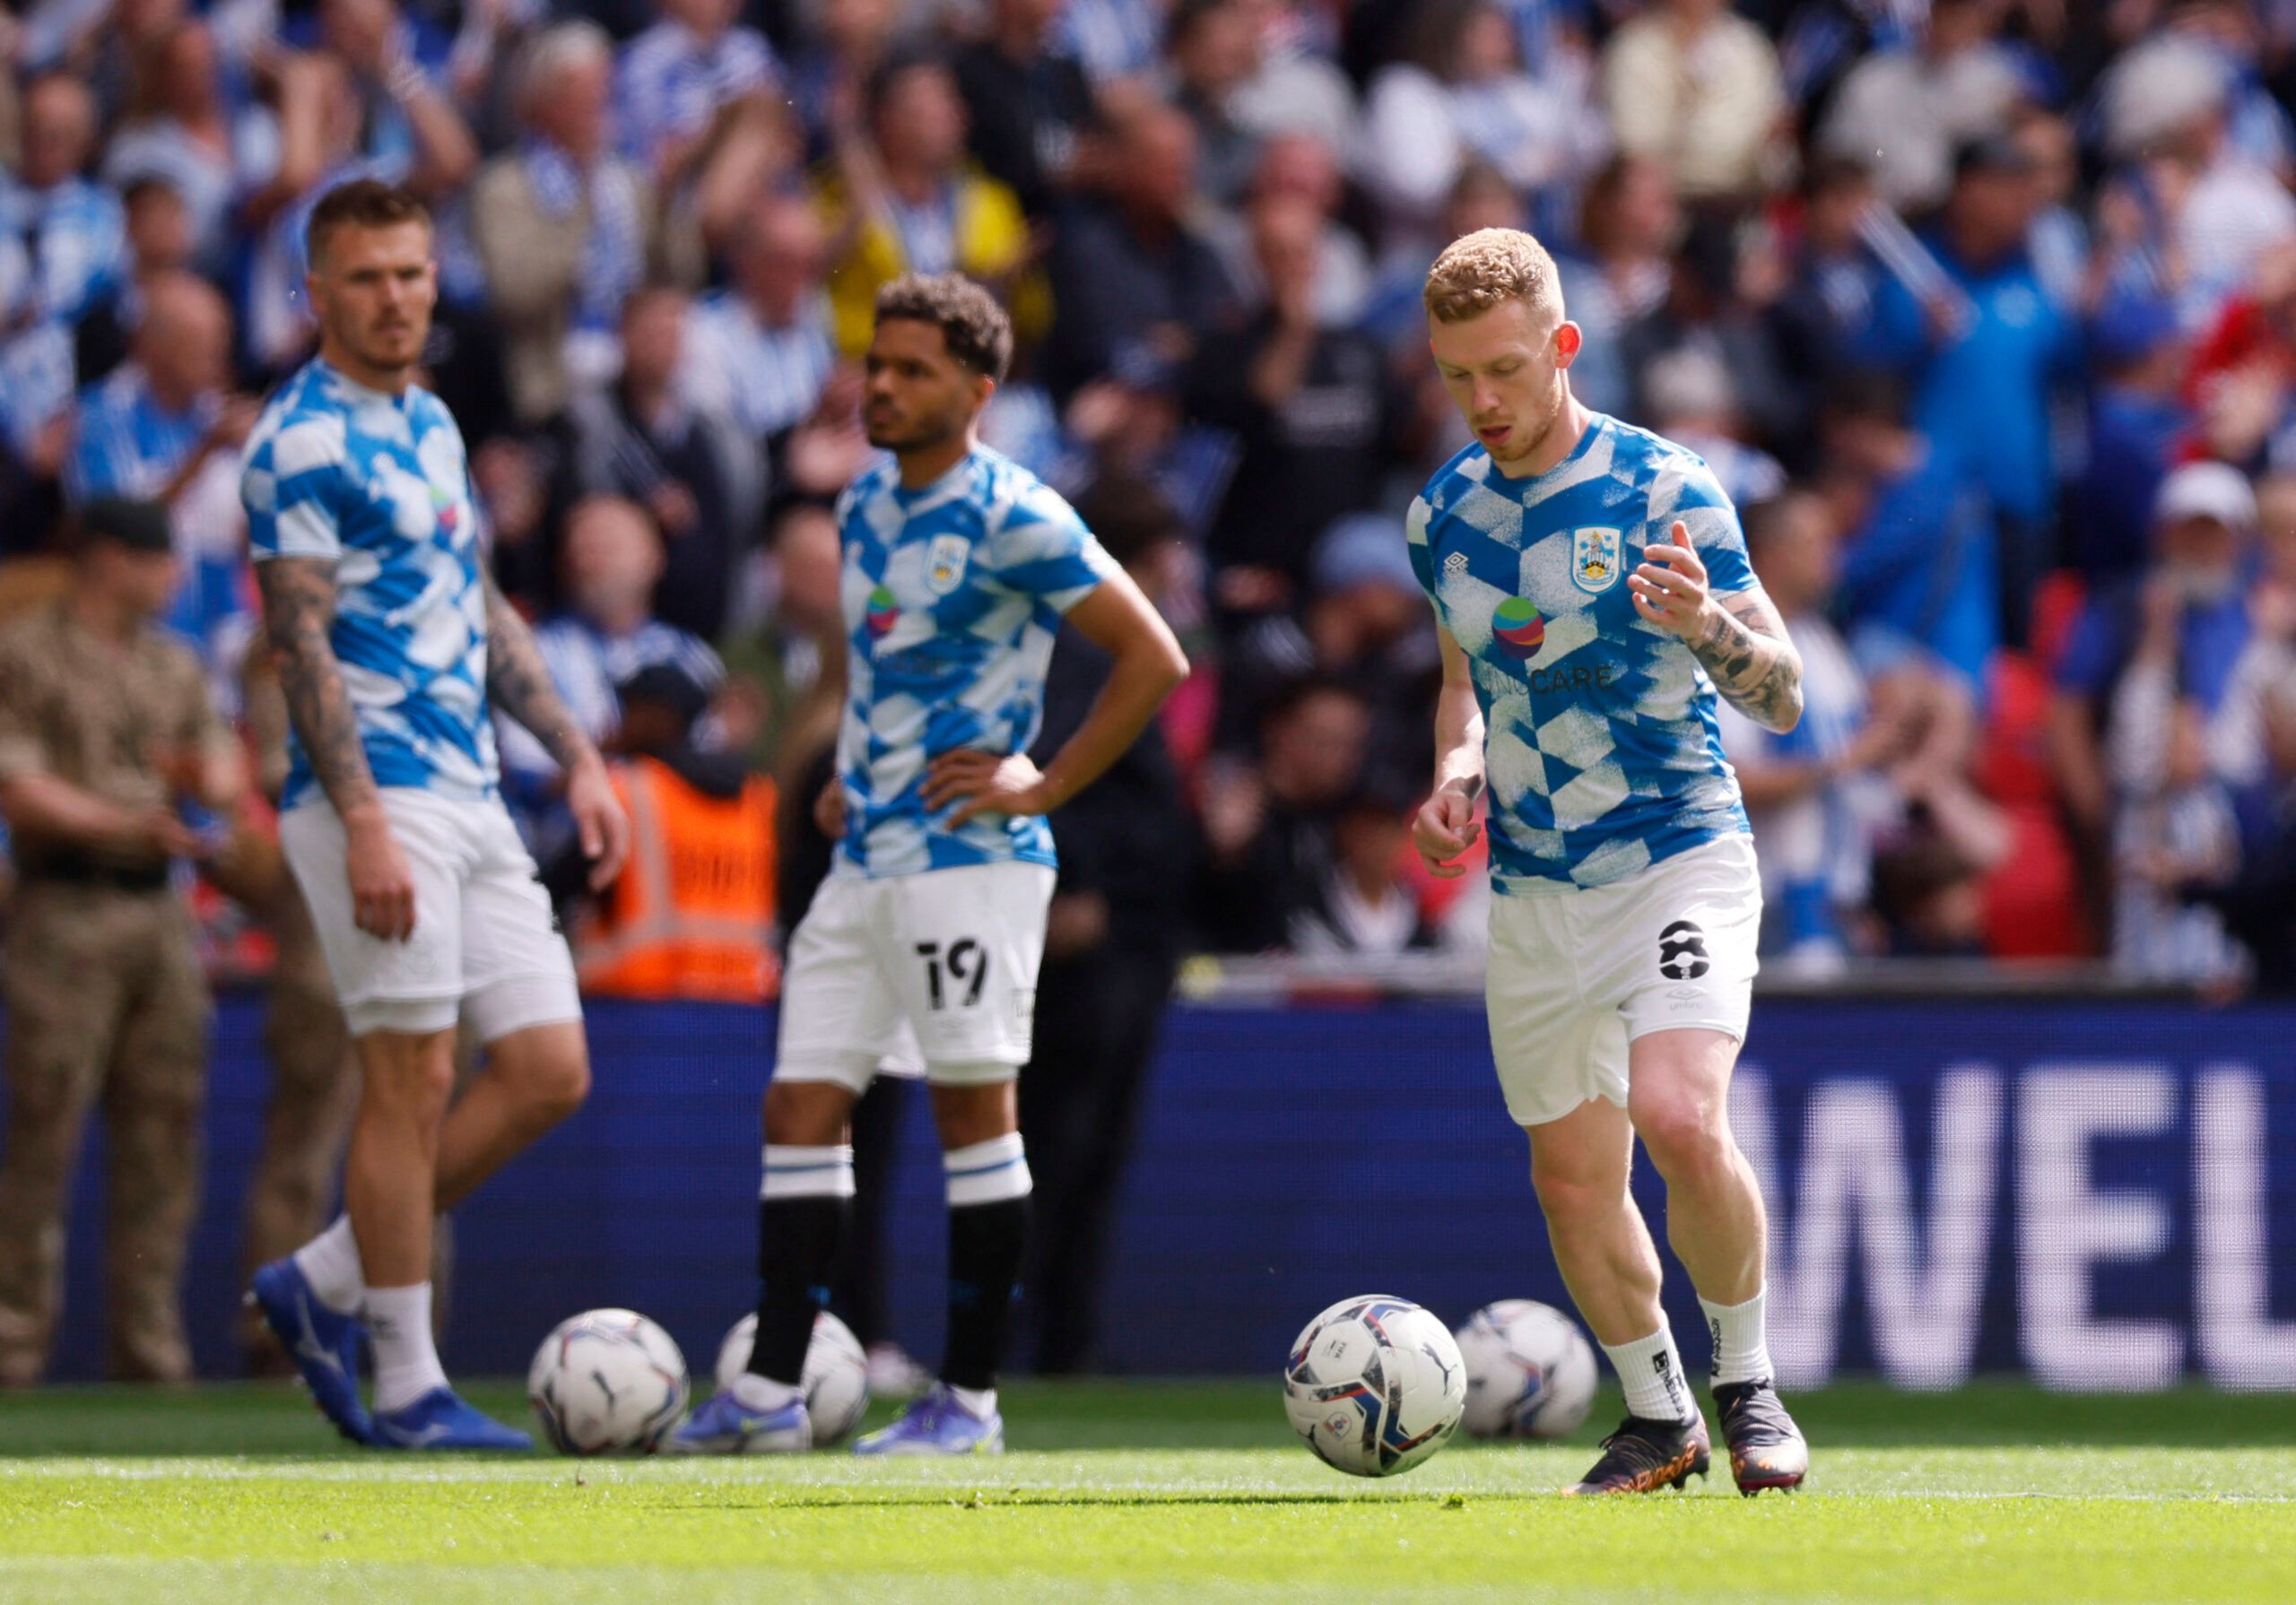 Soccer Football - Championship Play-Off Final - Huddersfield Town v Nottingham Forest - Wembley Stadium, London, Britain - May 29, 2022 Huddersfield Town's Lewis O'Brien during the warm up before the match Action Images via Reuters/Andrew Couldridge